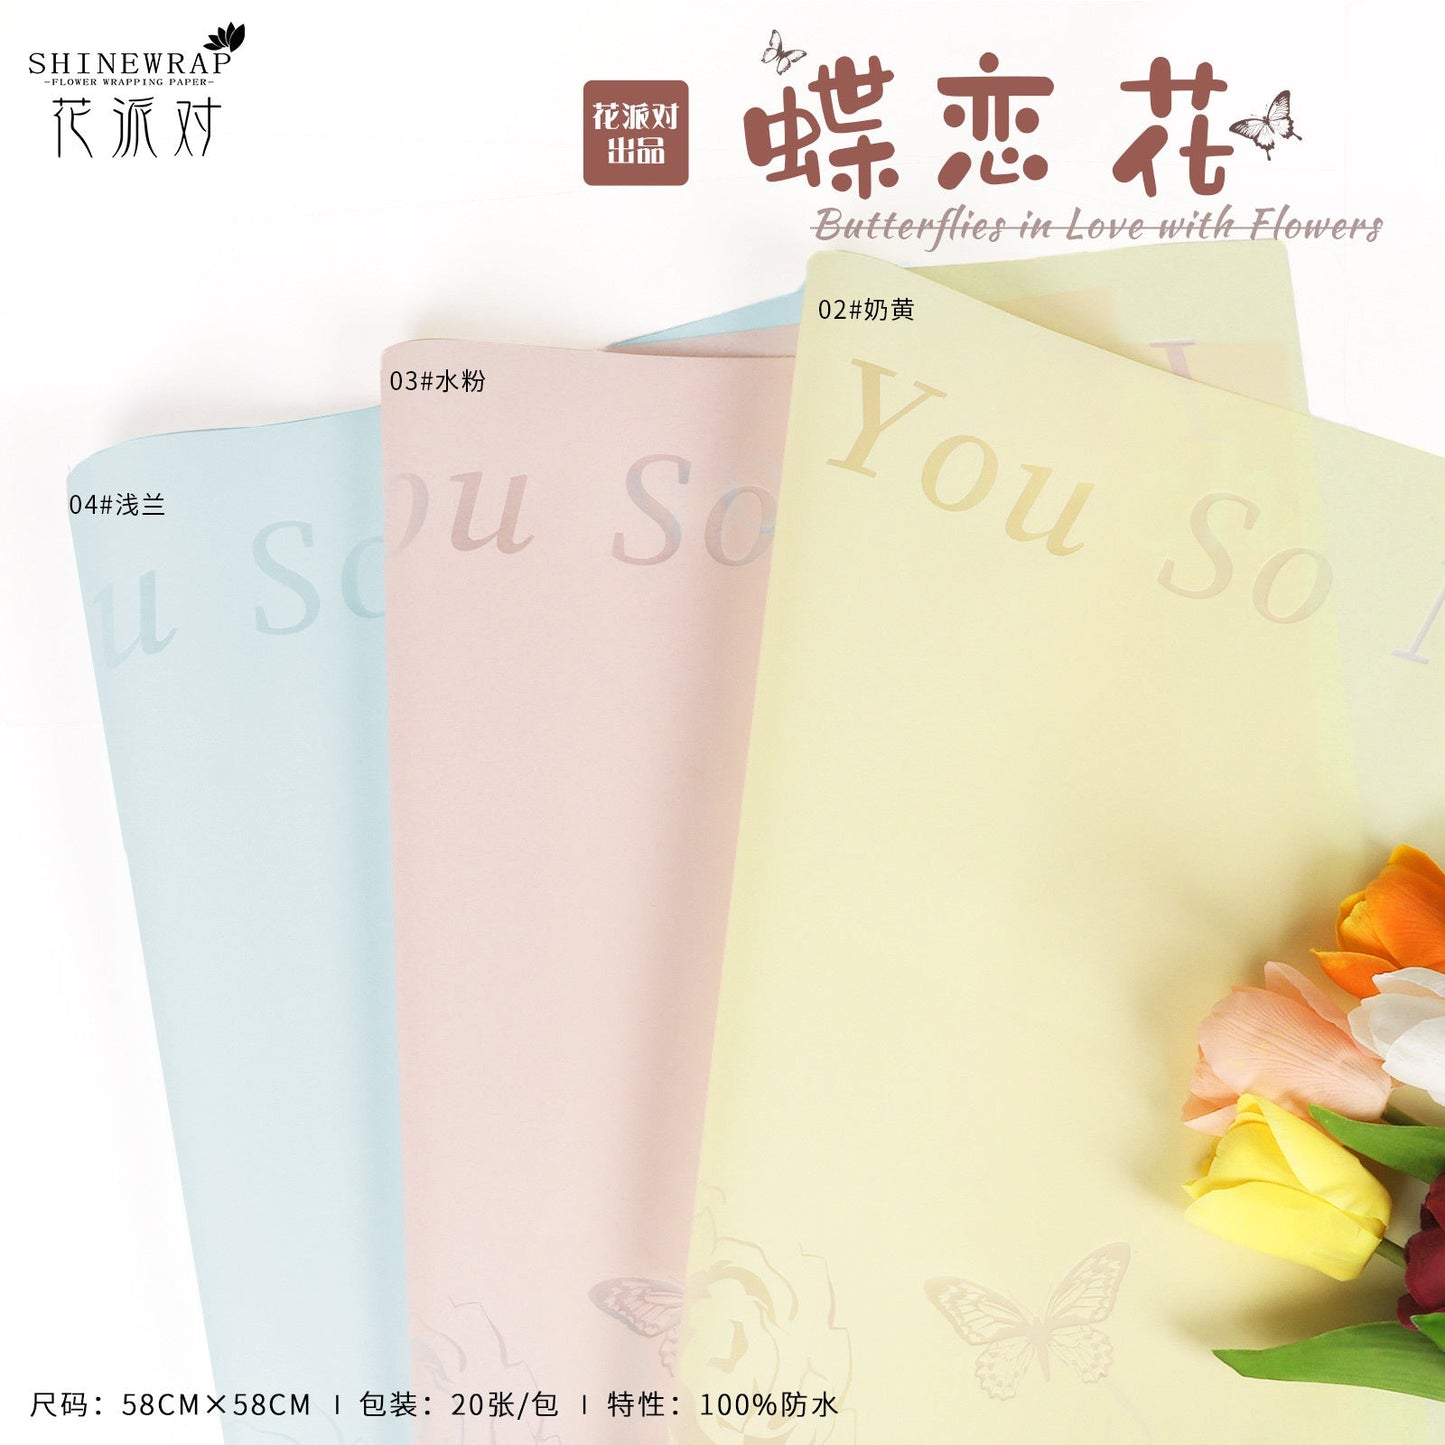 Flower Packaging Floral Bouquet Decoration,22.8*22.8 Inch-20 Sheets